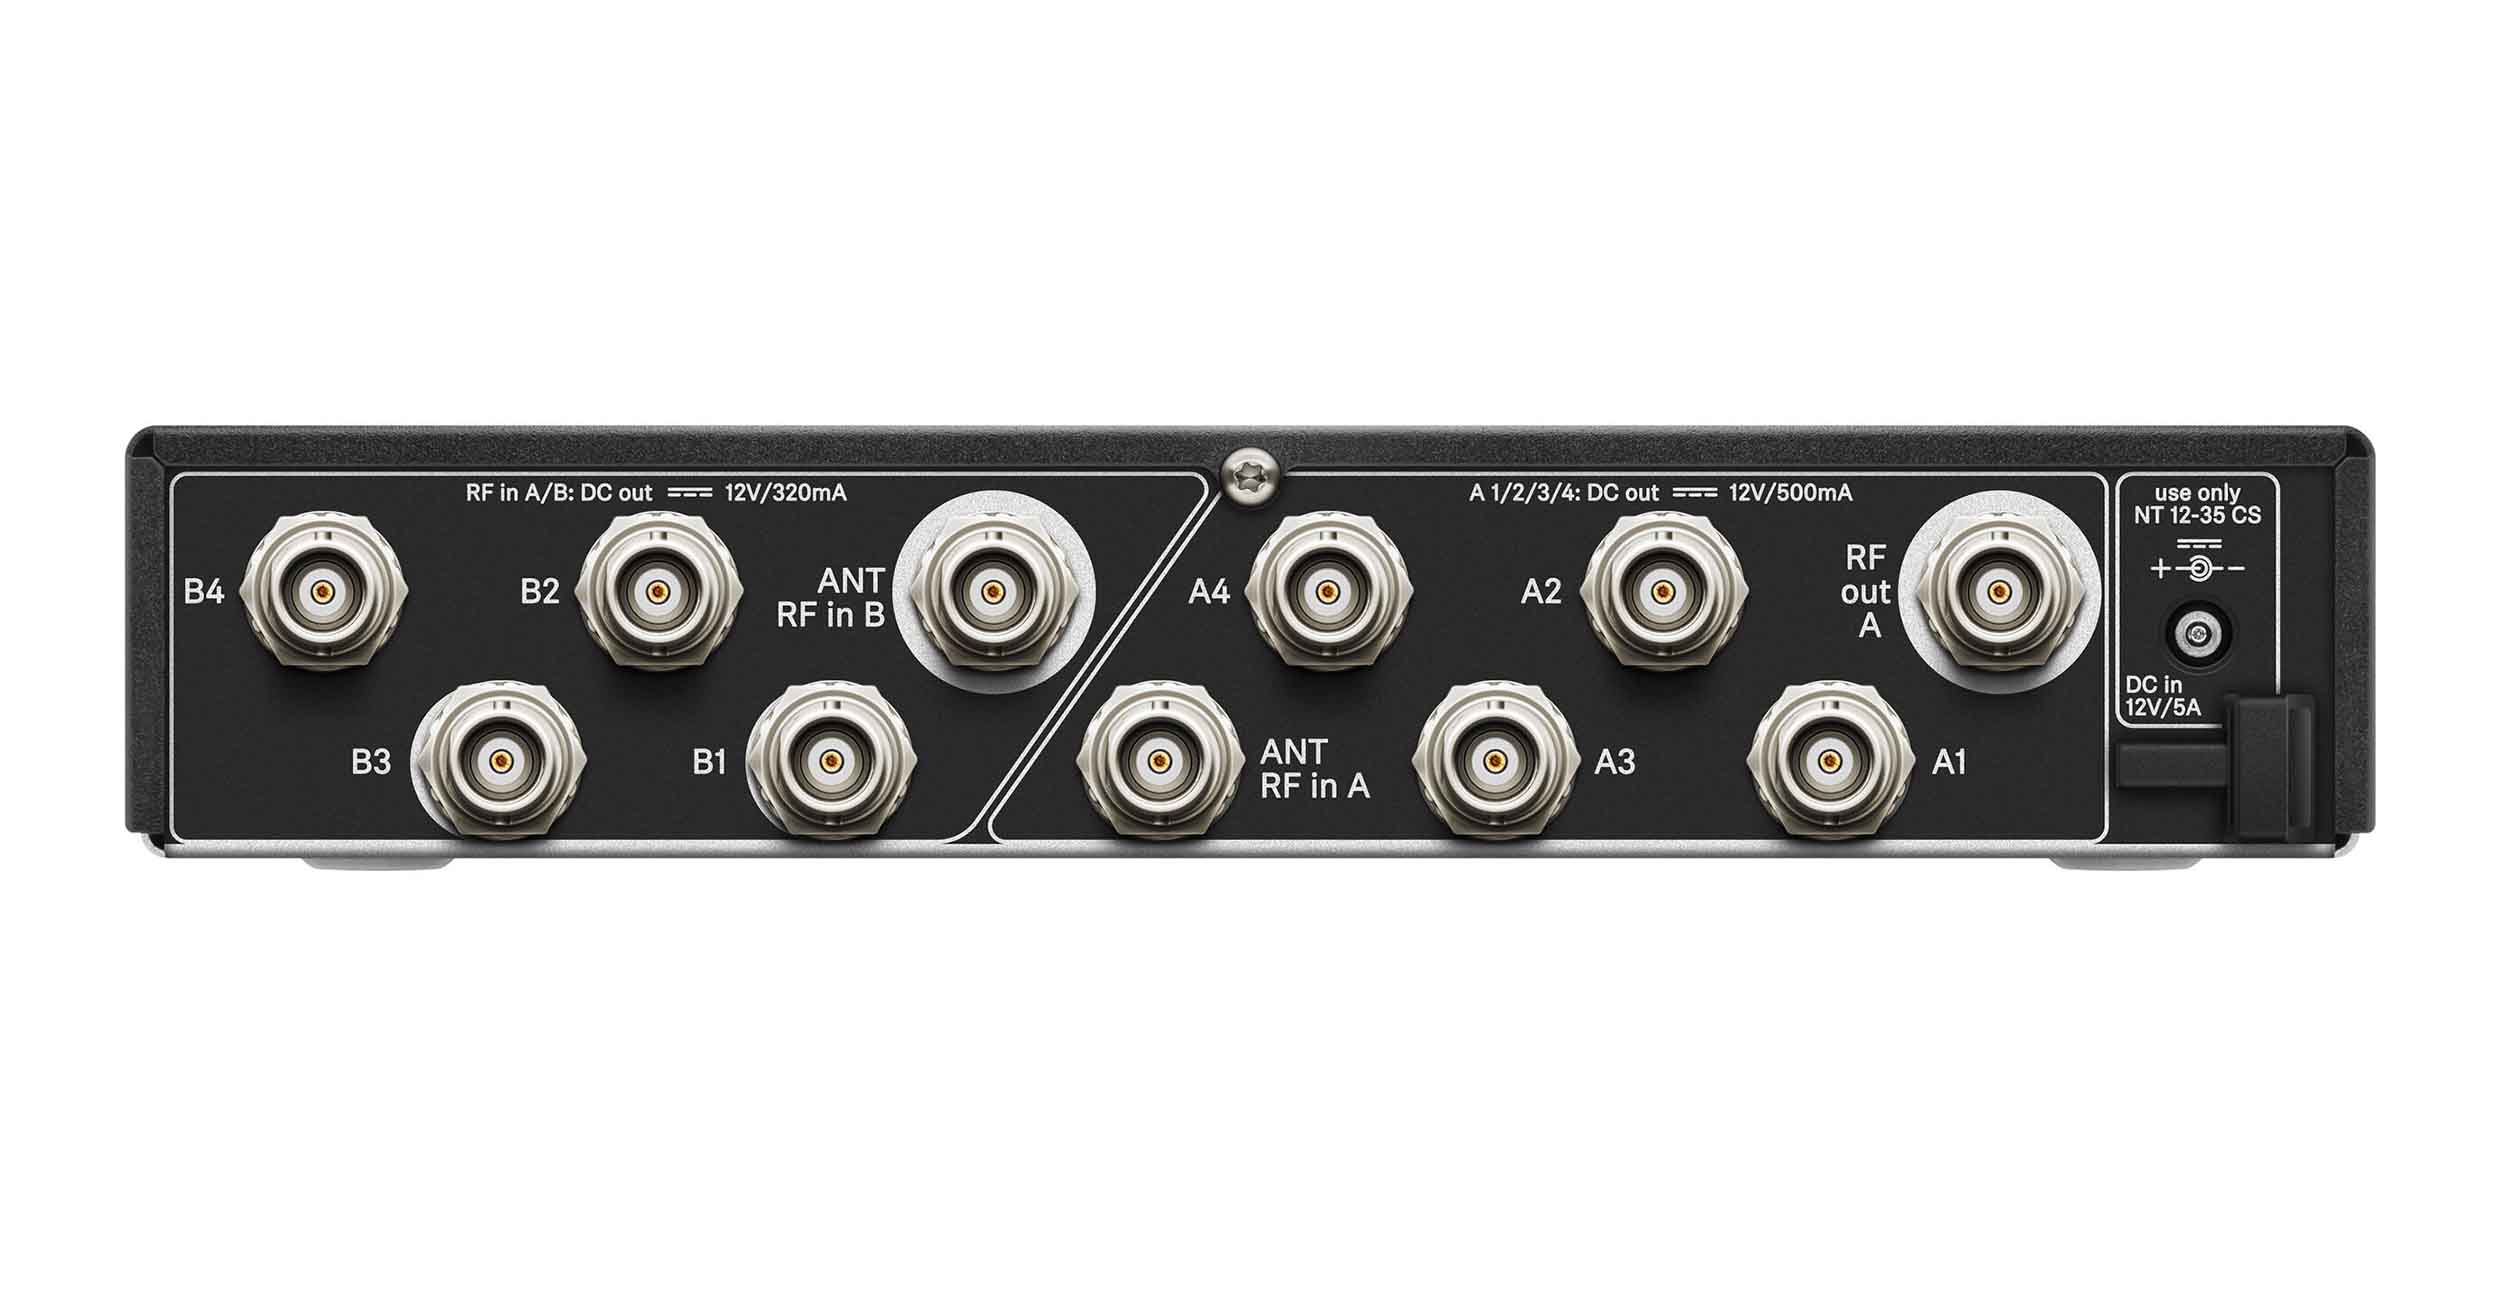 Sennheiser EW-D ASA (Q-R-S), 4-Way Active Antenna Splitter with DC Distribution for EW-D Wireless Systems - 470 to 694 MHz - Hollywood DJ